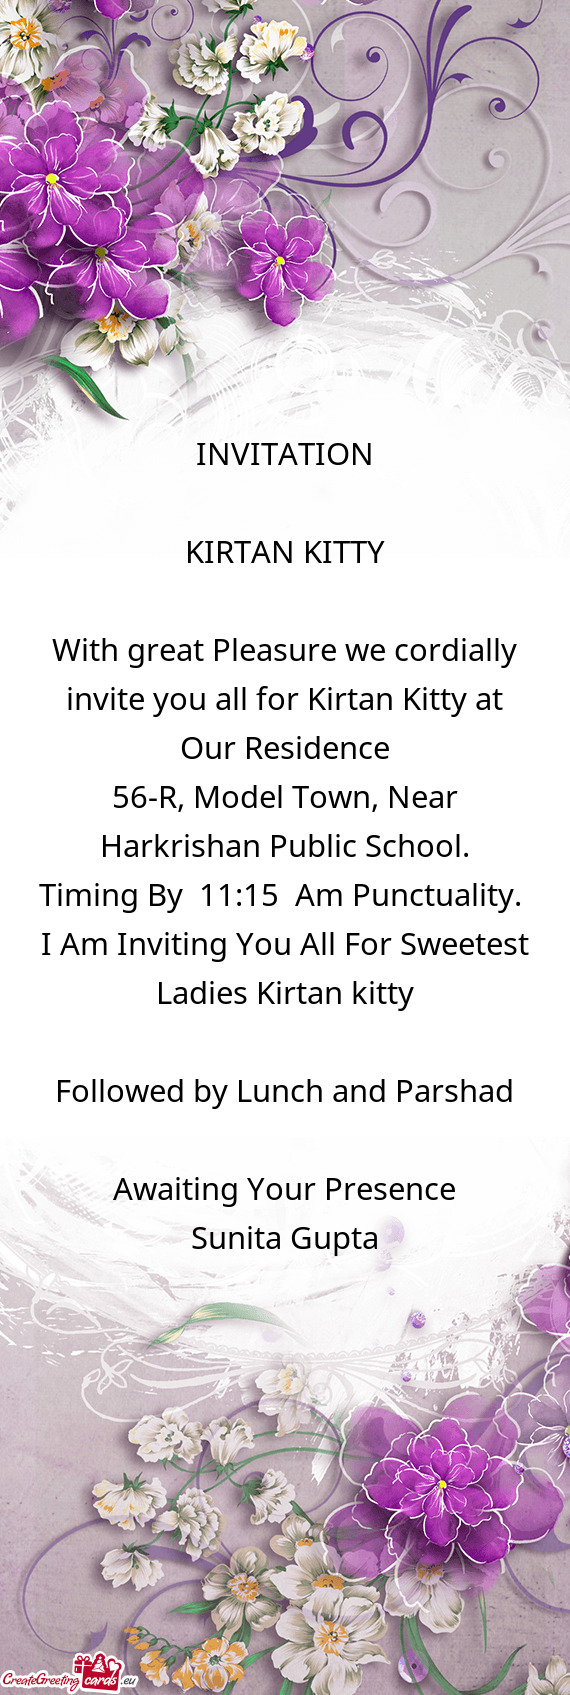 With great Pleasure we cordially invite you all for Kirtan Kitty at Our Residence